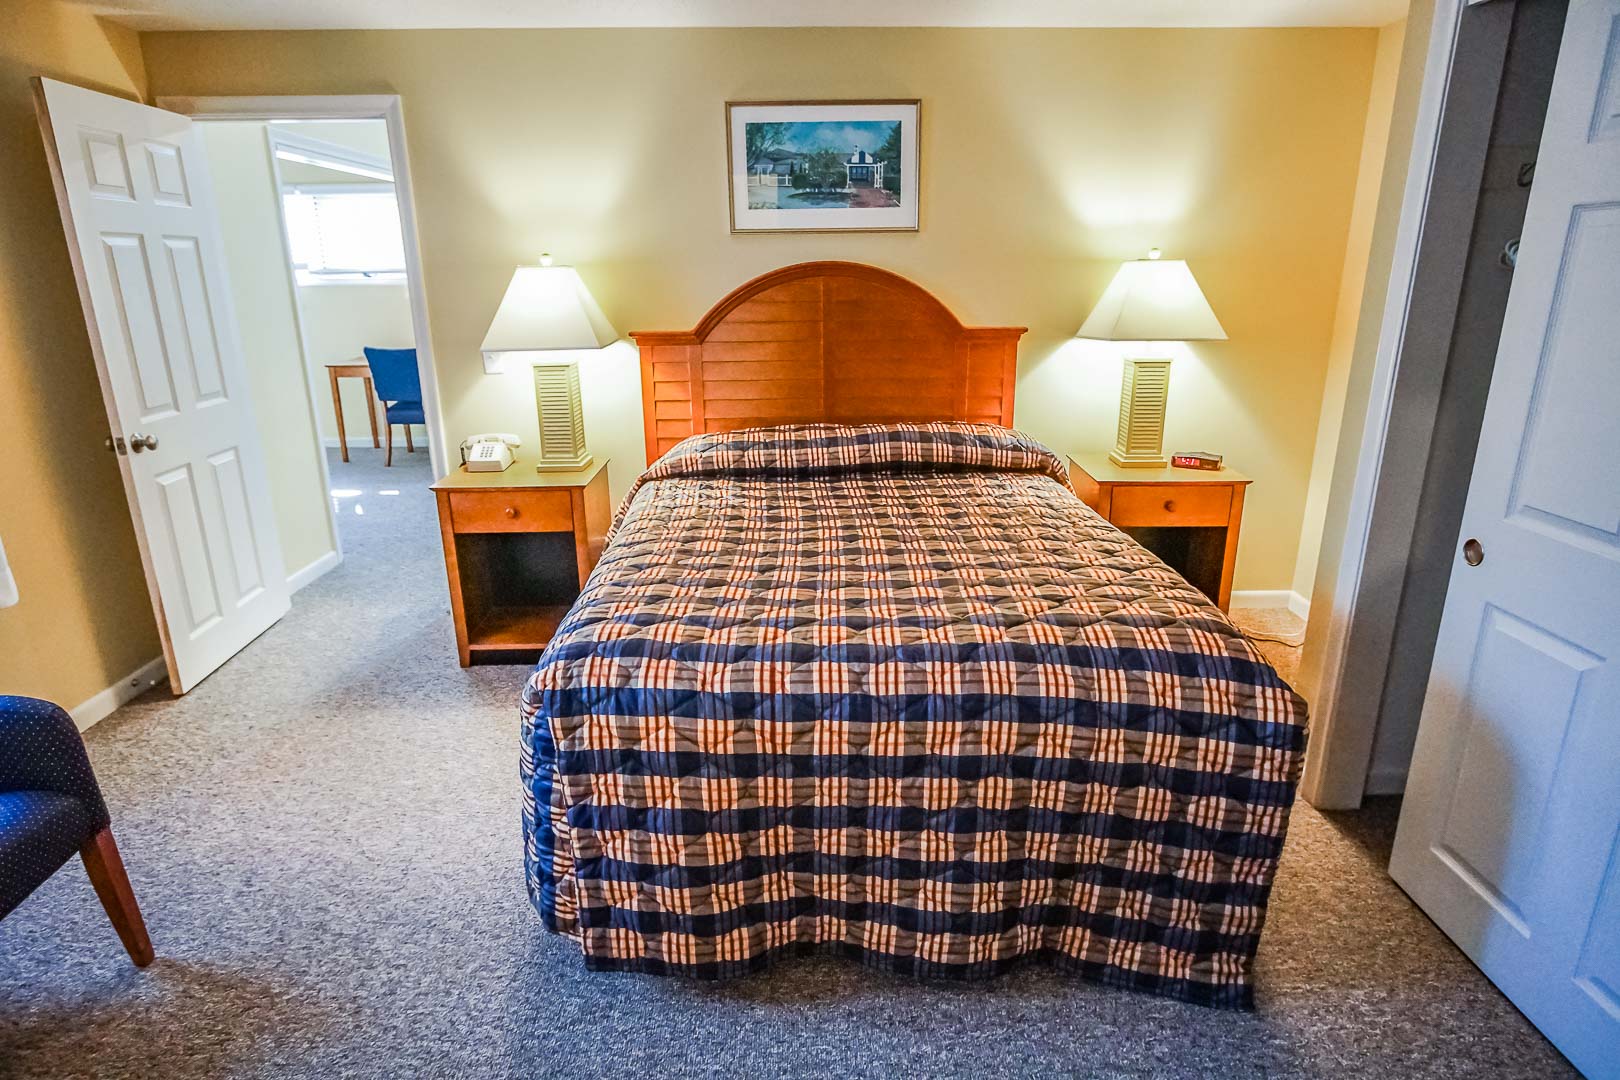 A fully equipped master bedroom at VRI's Cape Cod Holiday Estates in Massachusetts.